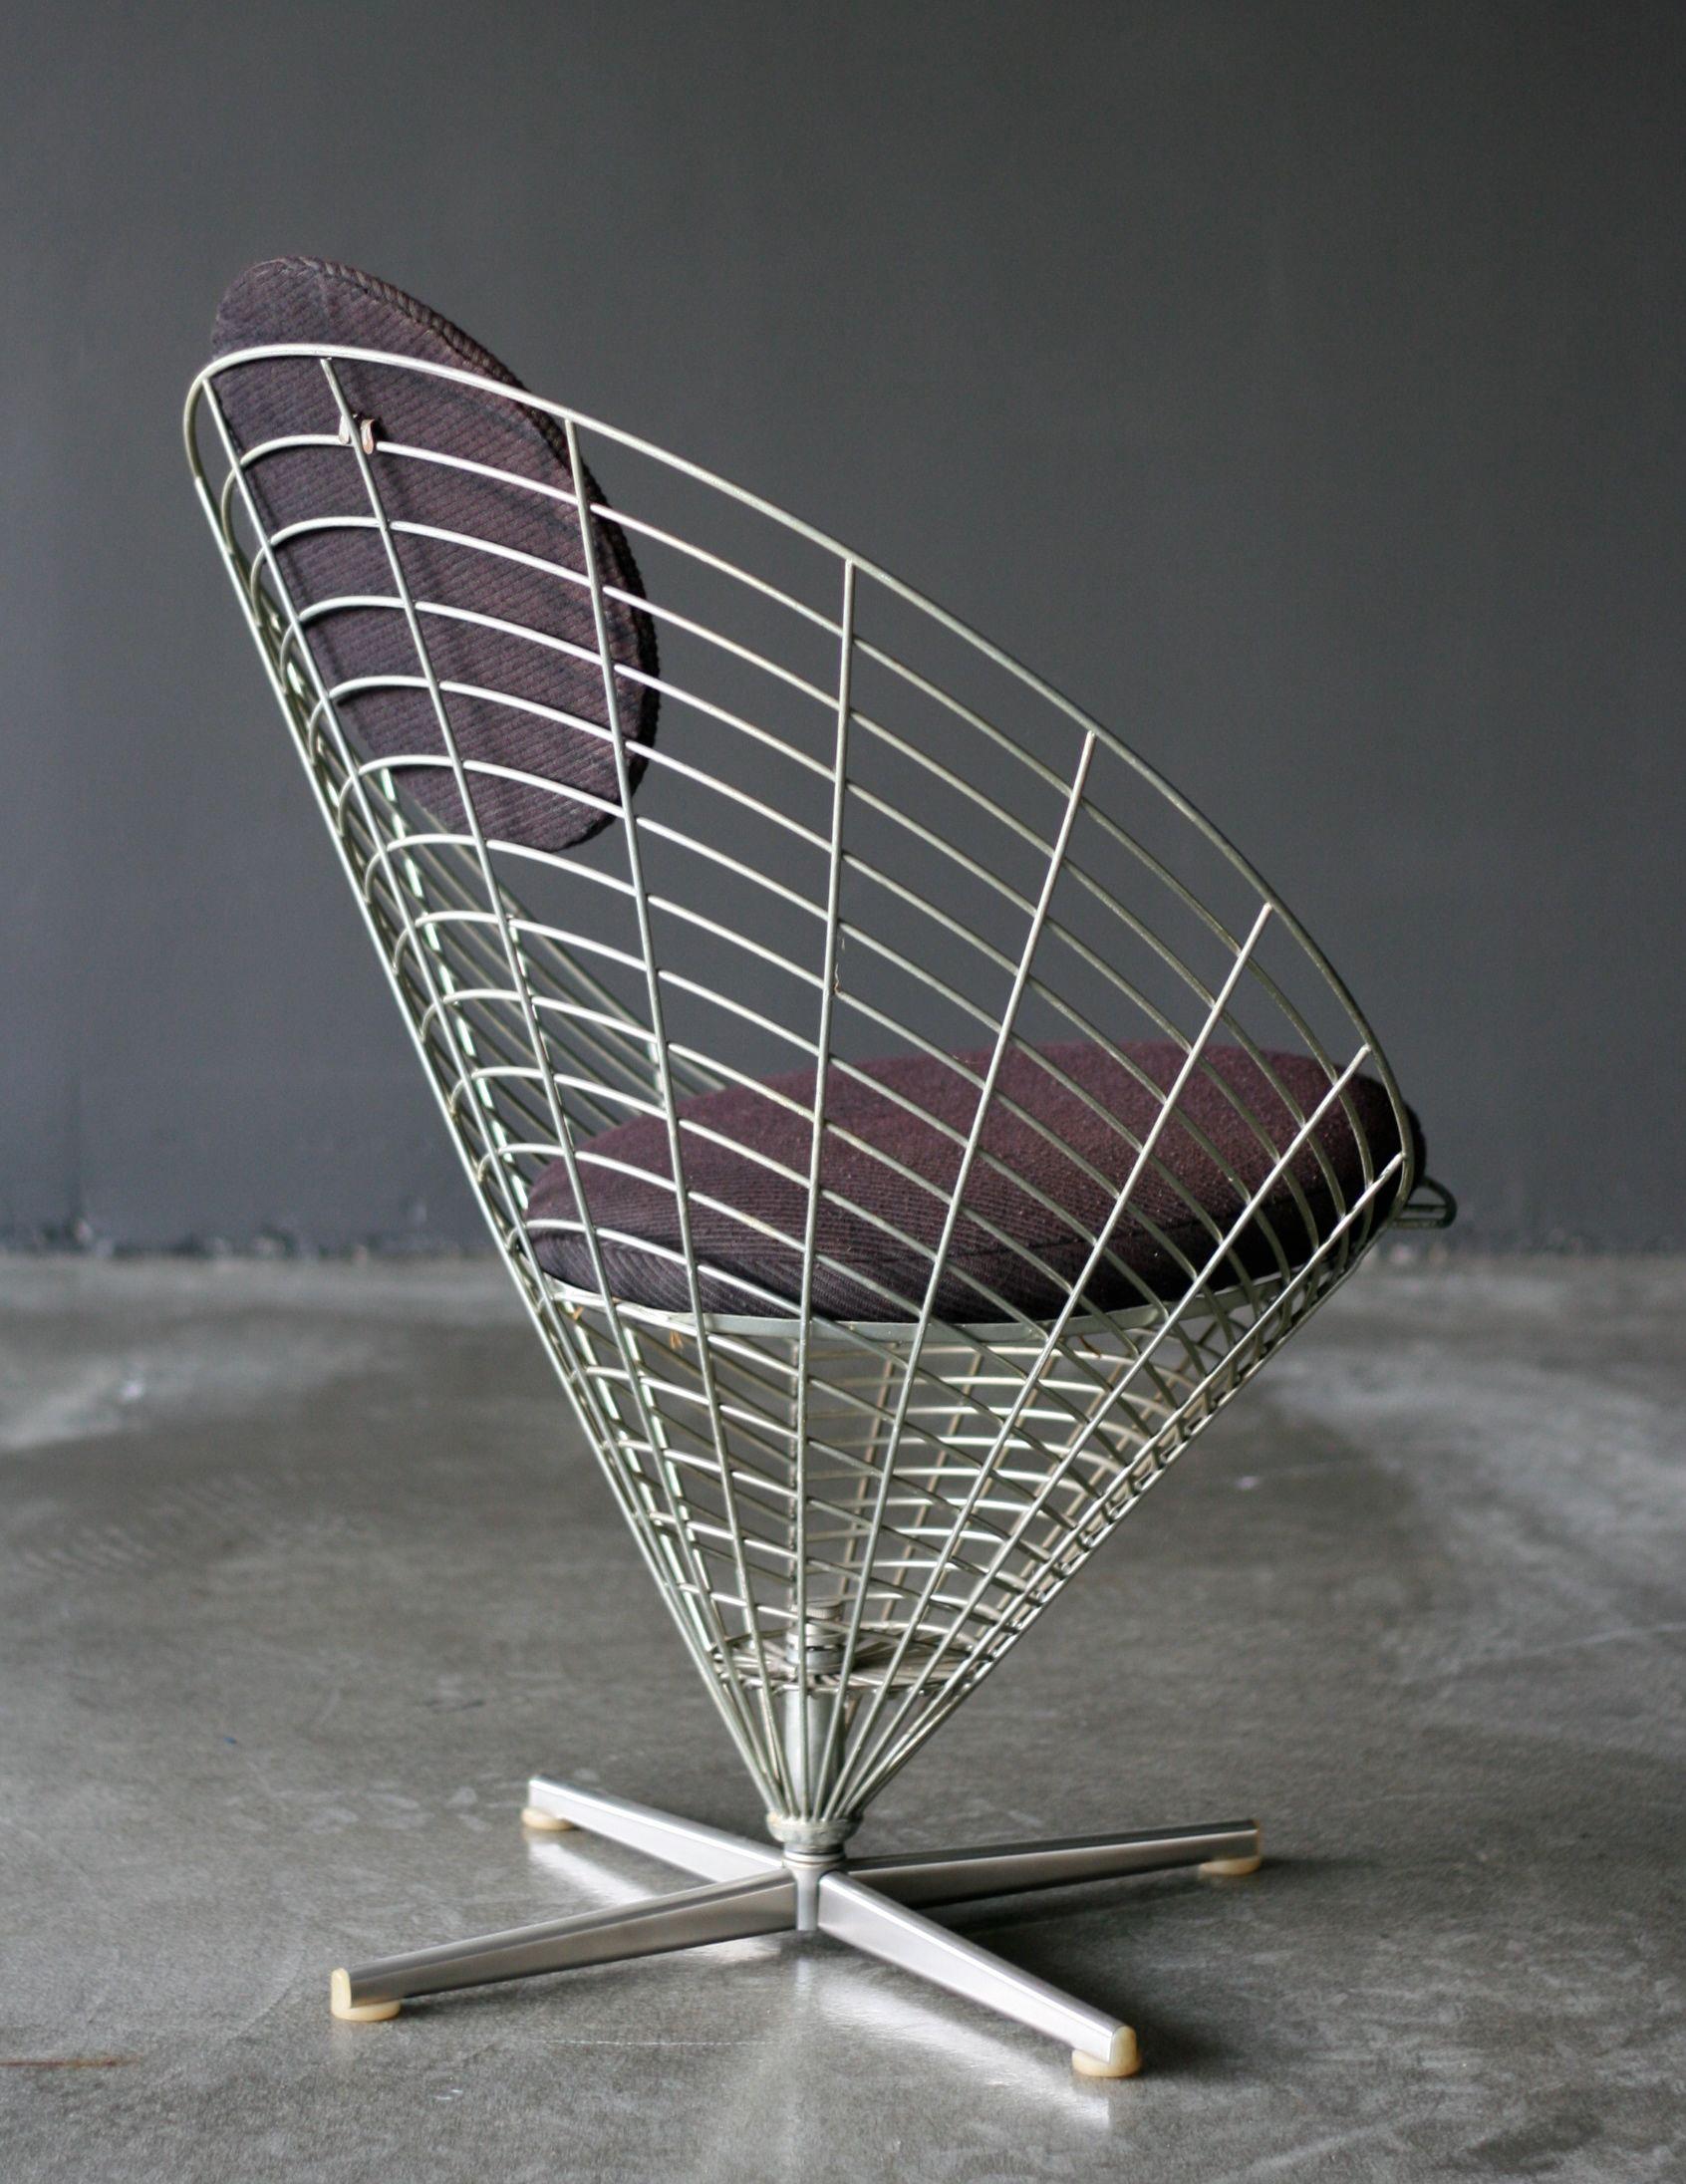 Wire cone lounge chair, designed in 1958 by Verner Panton for Plus Linje.
Very early zinc-plated wire frame, with original Panton Op-Art fabric seat and back in all original flawless condition.